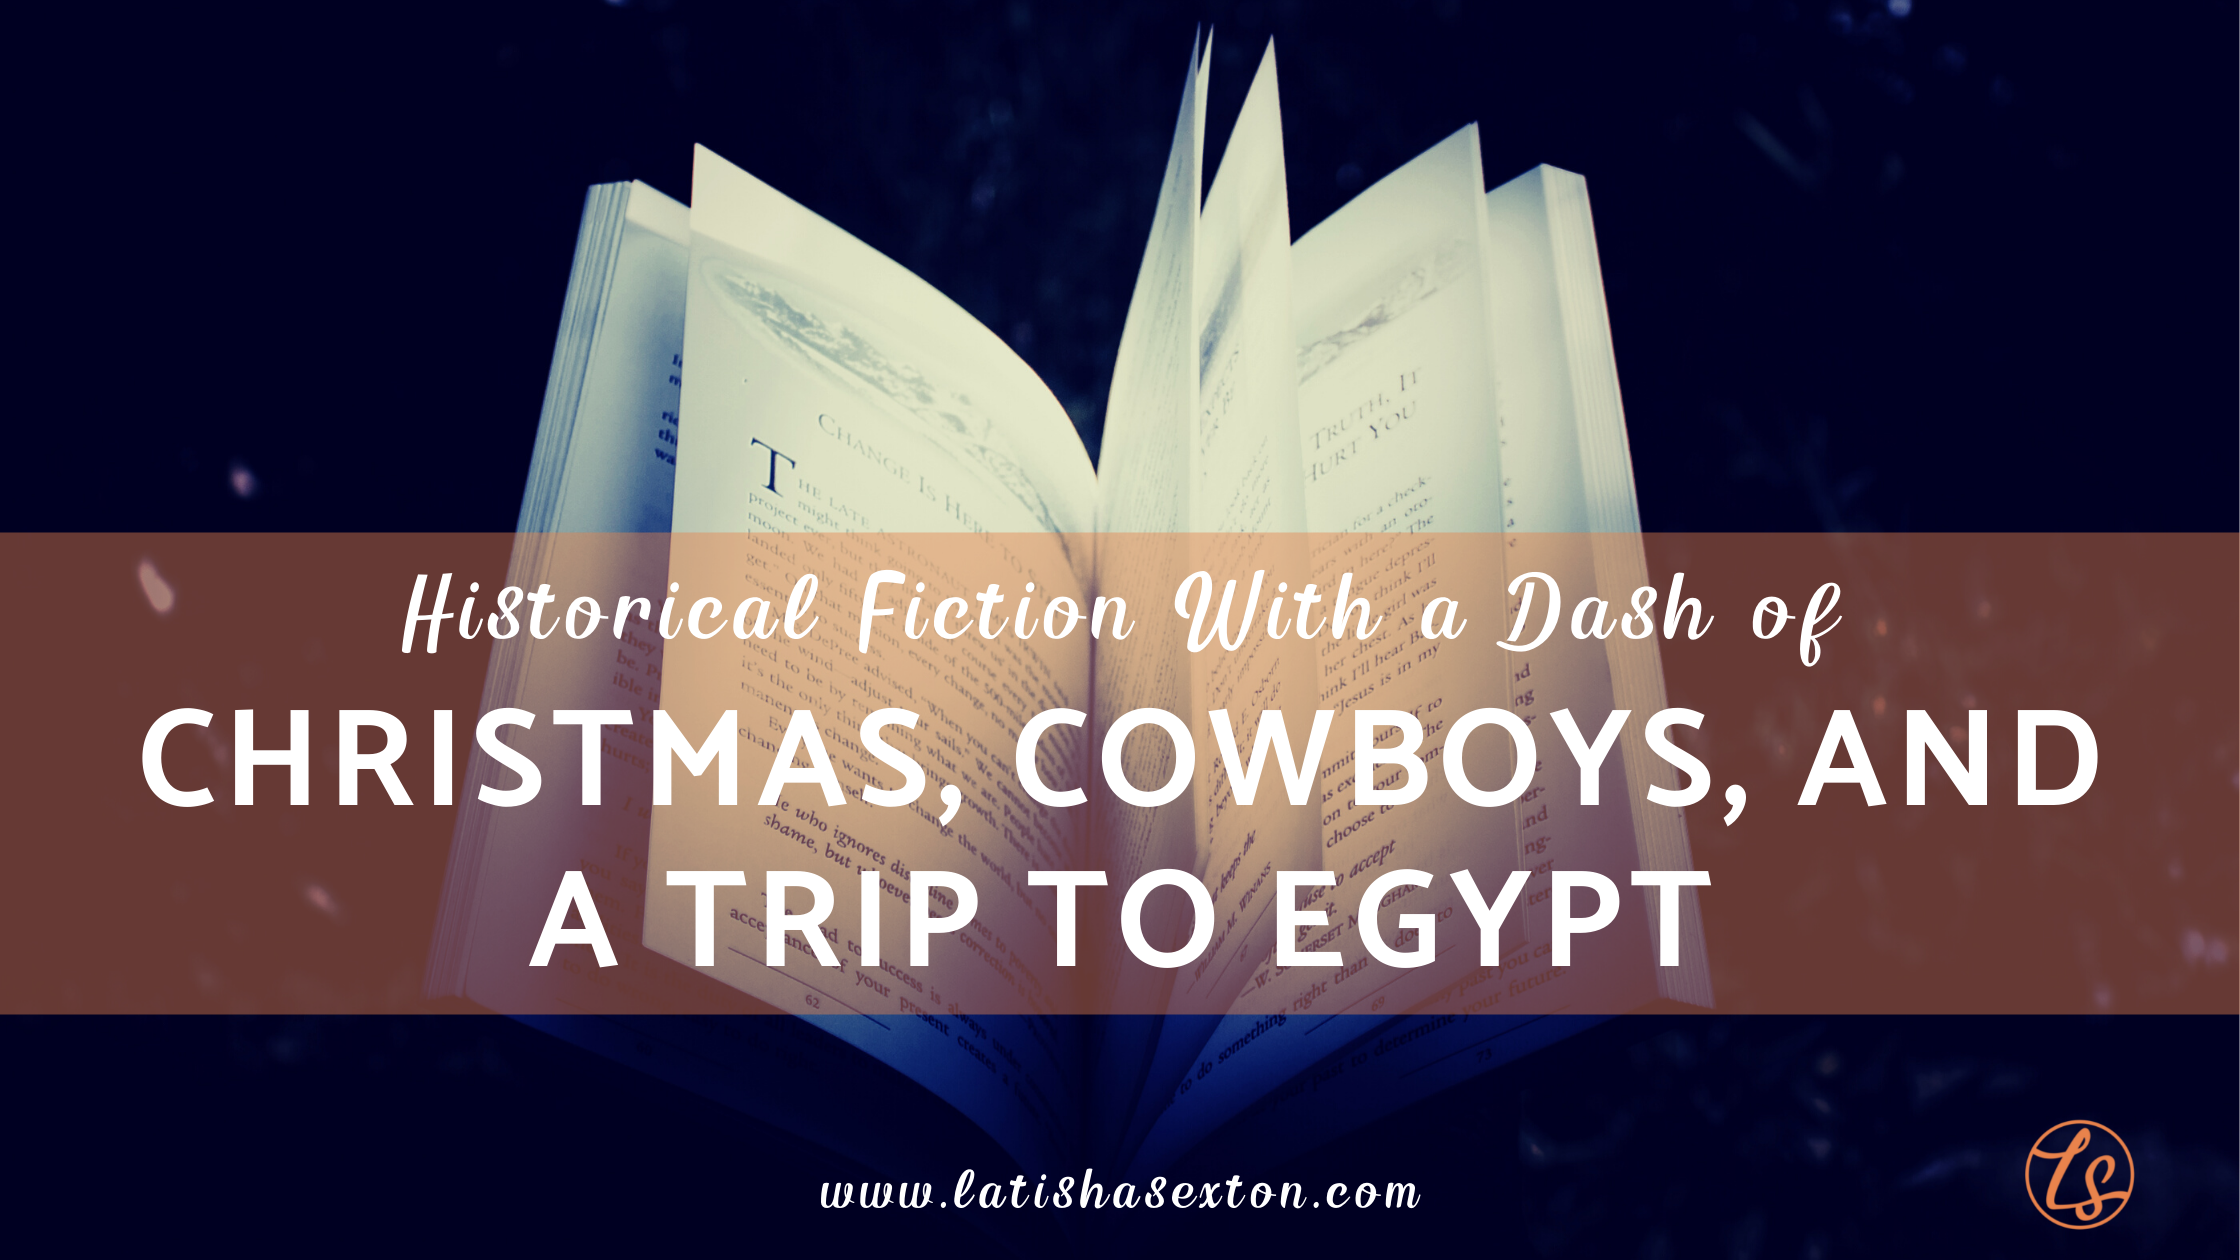 Historical Fiction With a Dash of Christmas, Cowboys, and a Trip to Egypt…